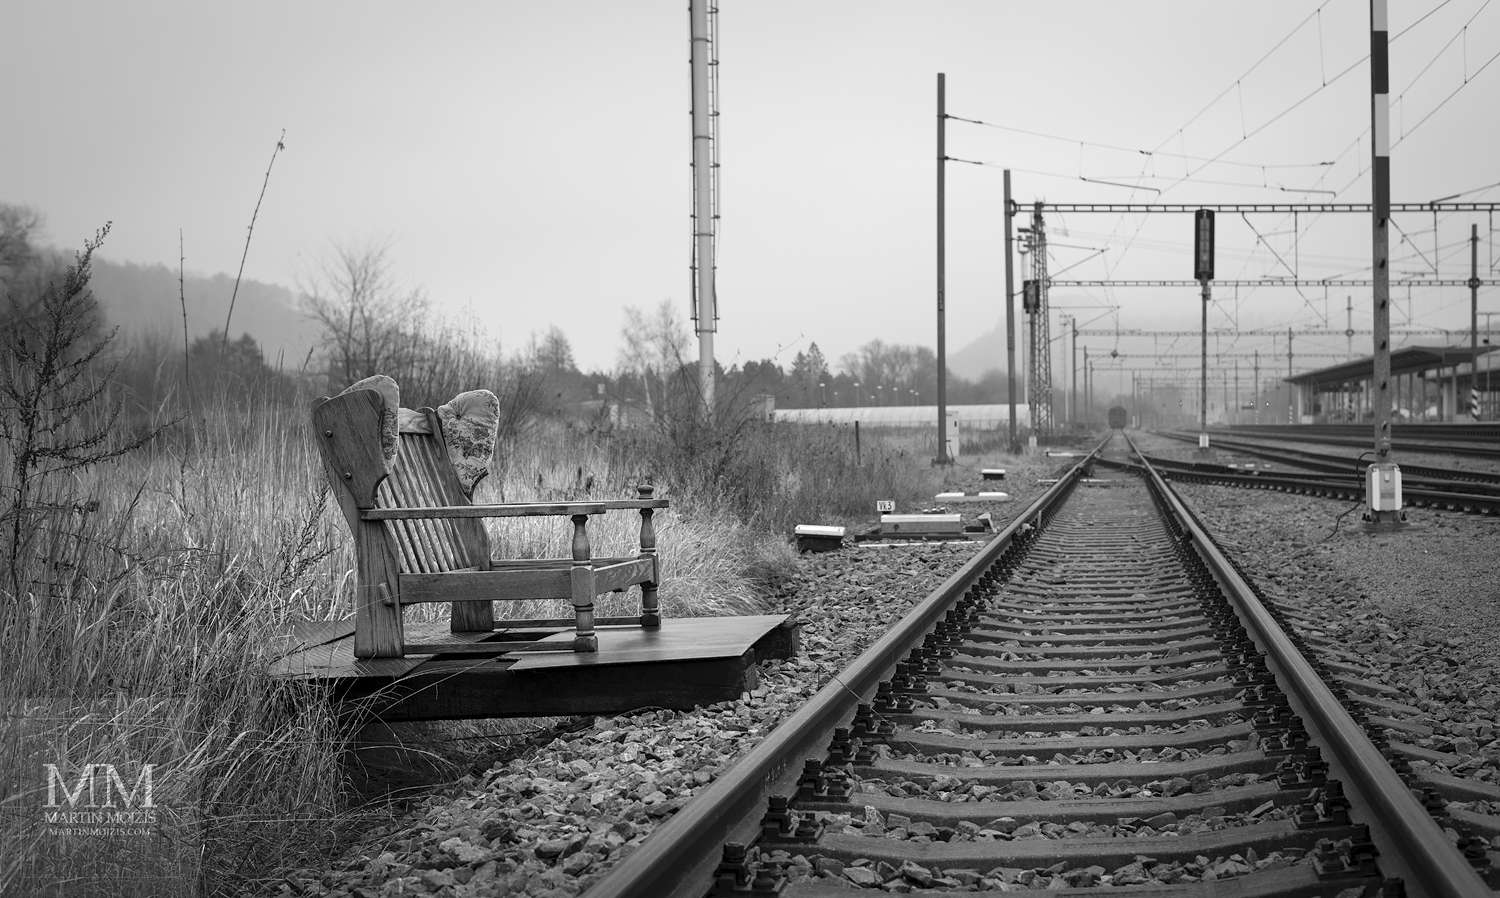 A sofa by tracks at a train station. Fine Art black and white photograph by Martin Mojzis with the title WELCOME TO MY HOUSE VII.